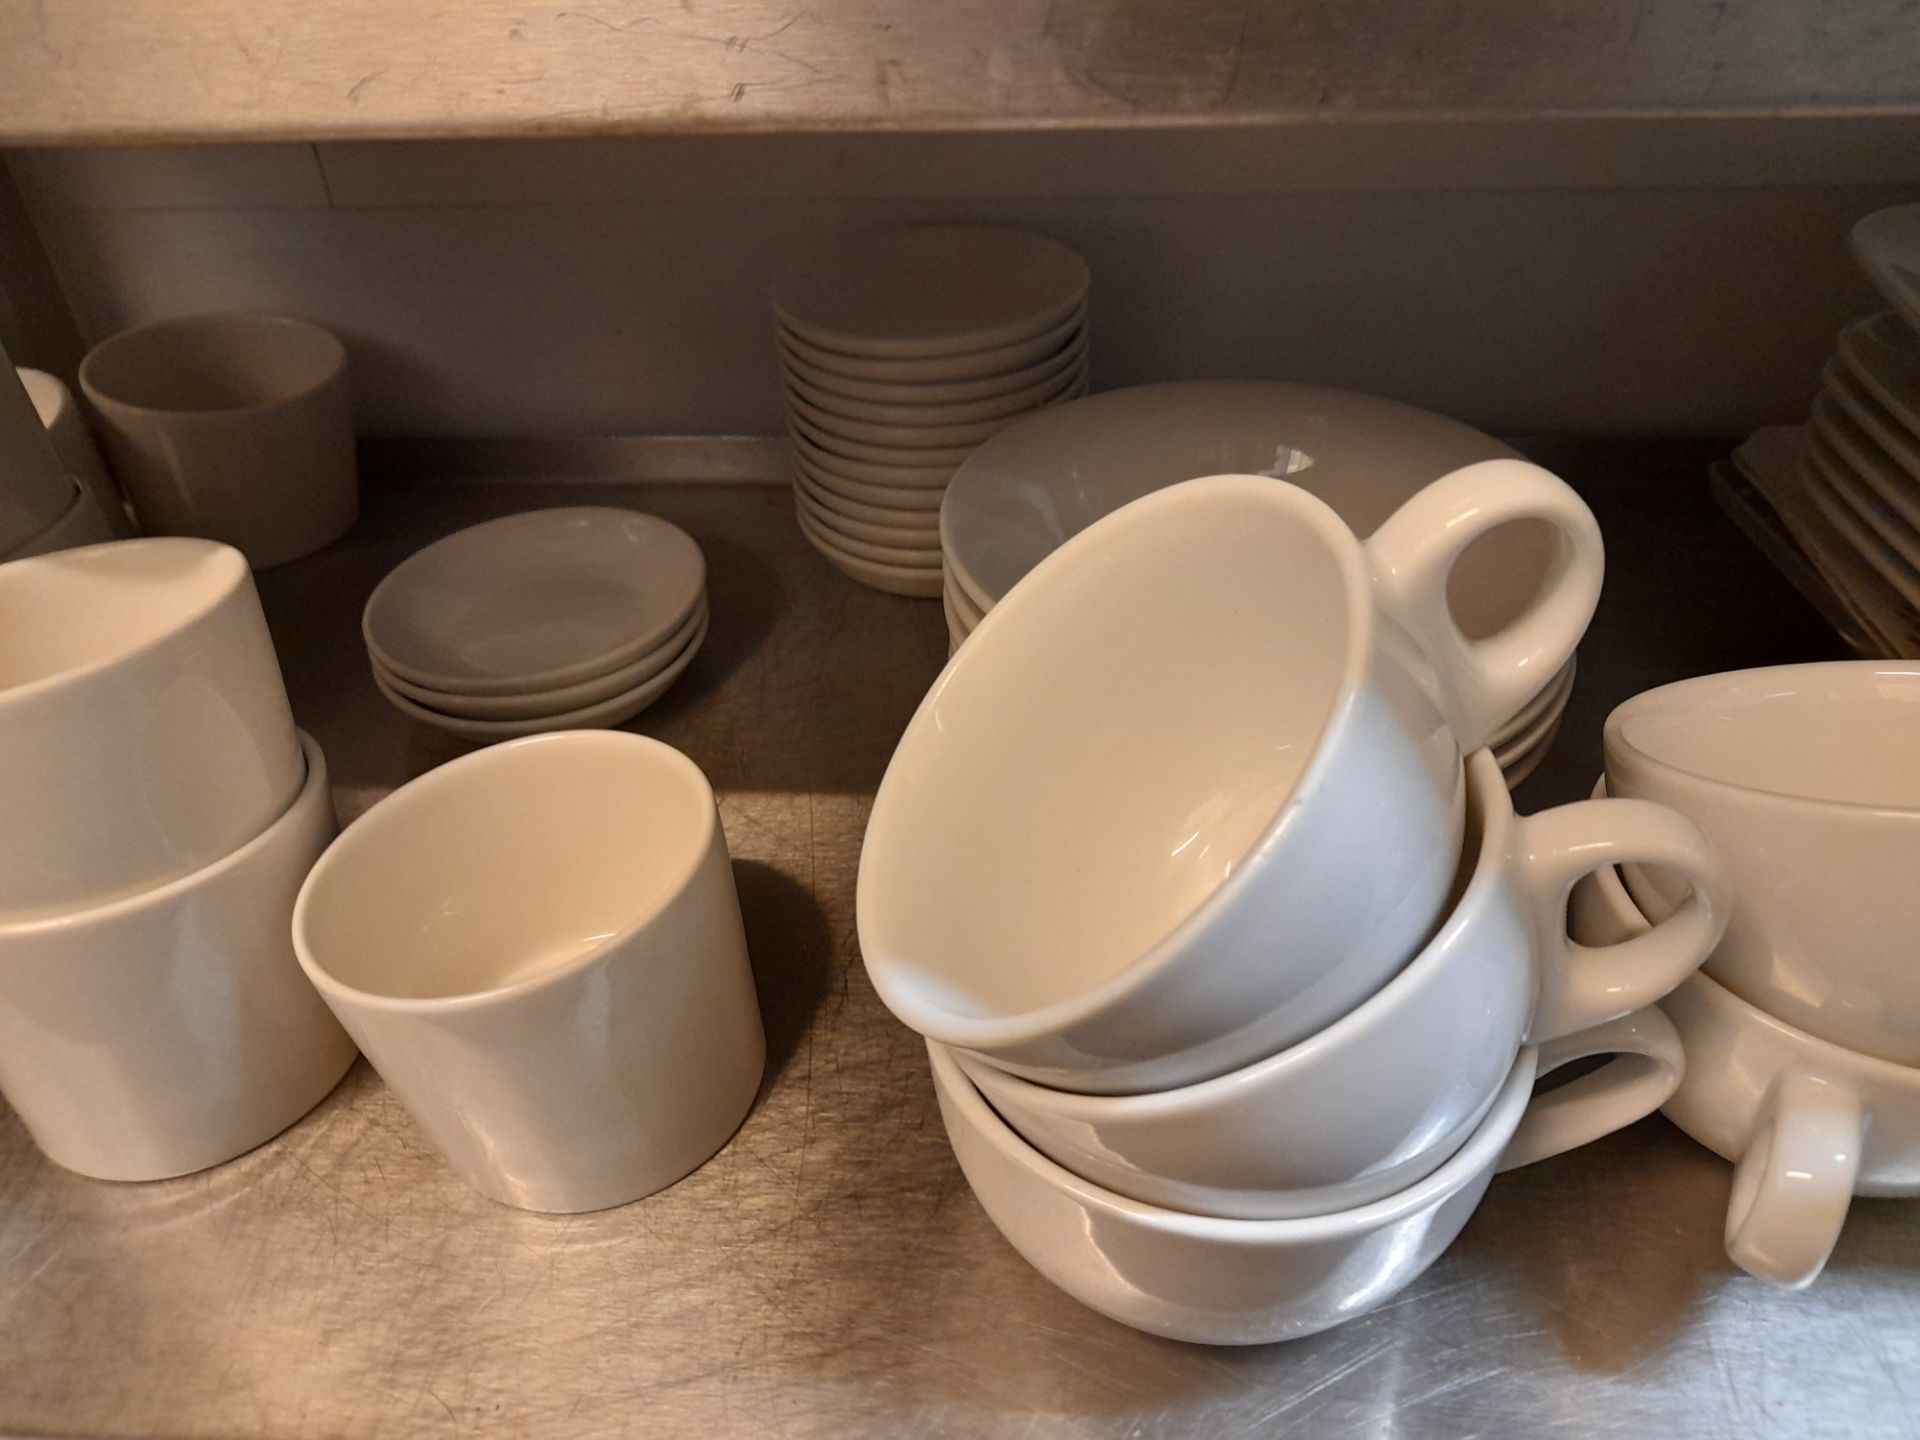 Assortment of crockery to trolley, to include plates, cups, saucers, etc - Image 4 of 5